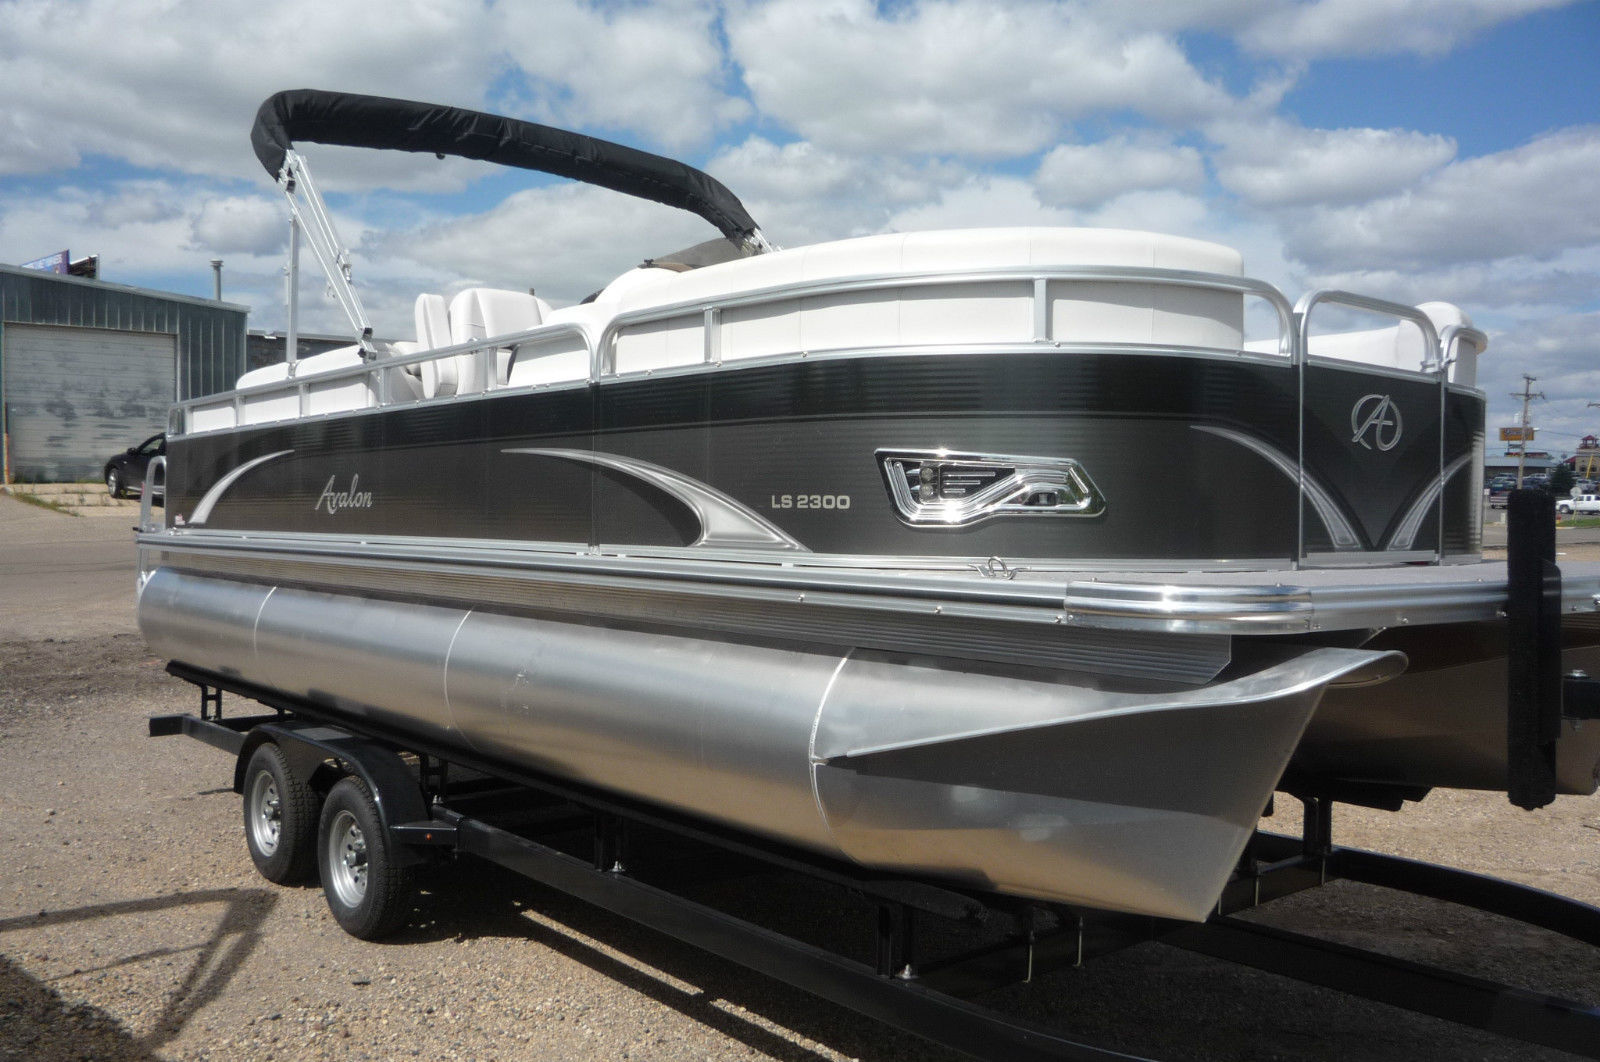 AVALON LS2300QL 2014 for sale for $28,350 - Boats-from-USA.com